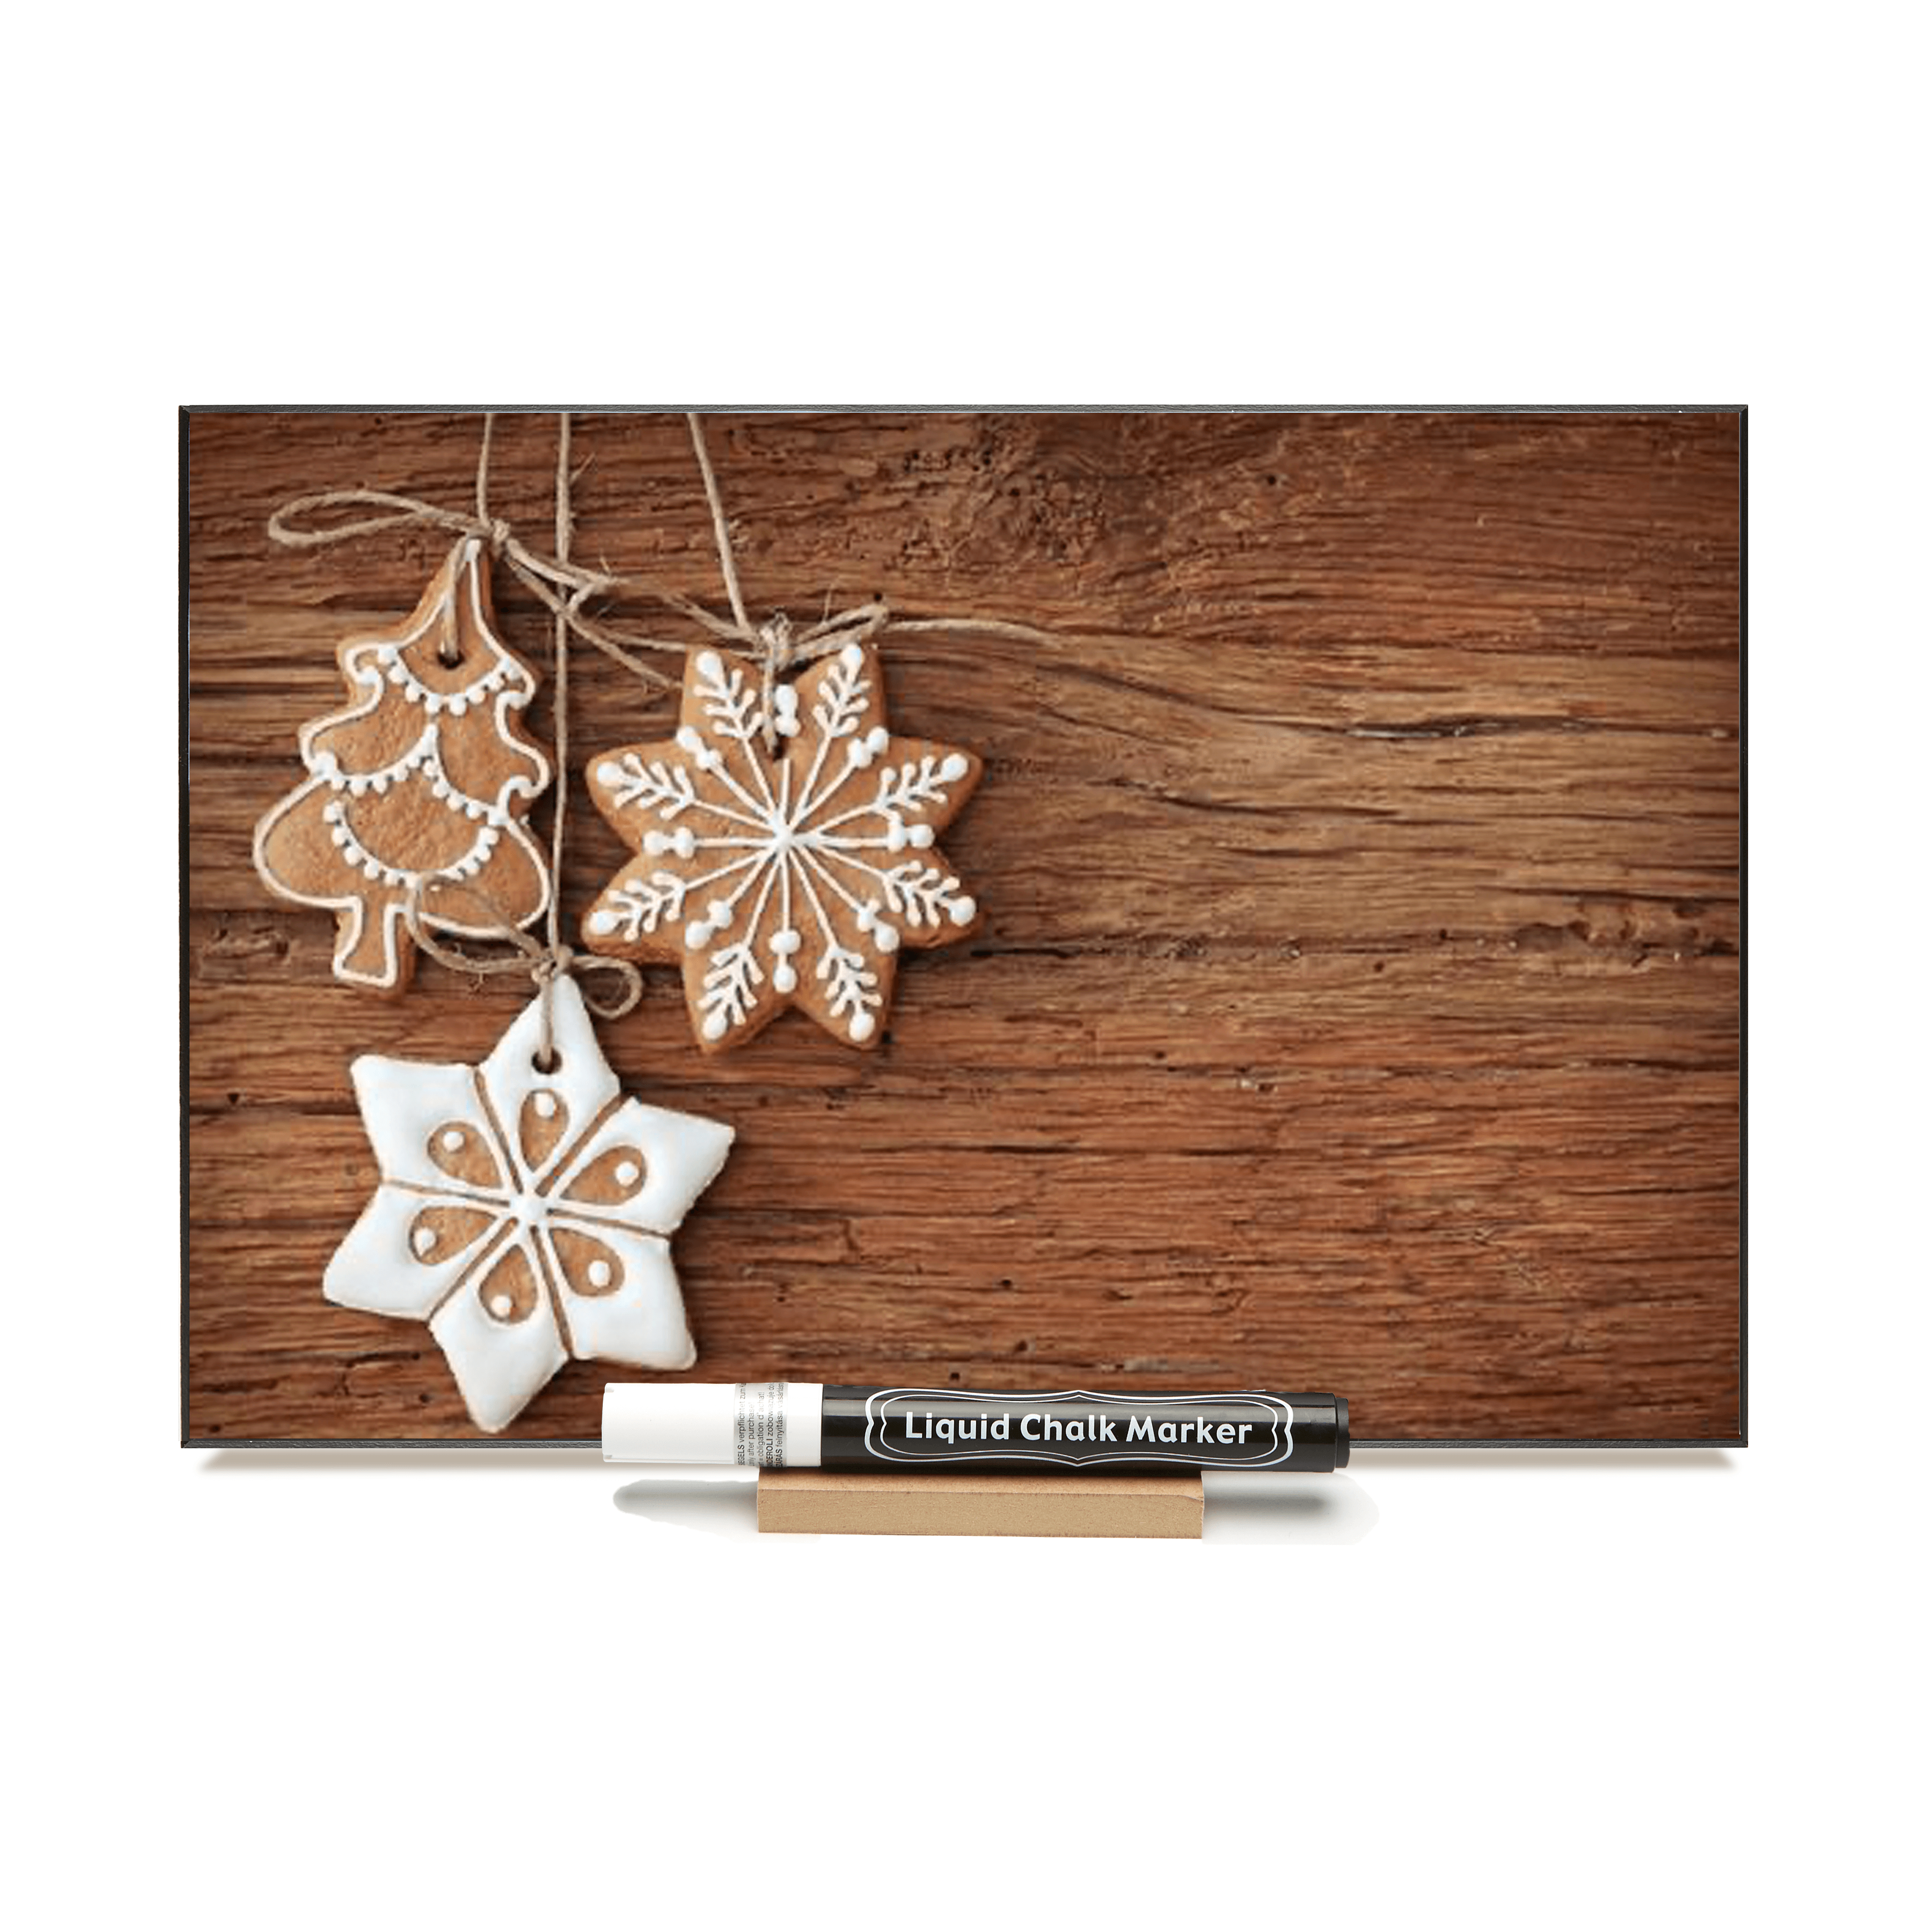 "Cookie Ornaments" PHOTO CHALKBORD  Includes Chalkboard, Chalk Marker & Stand